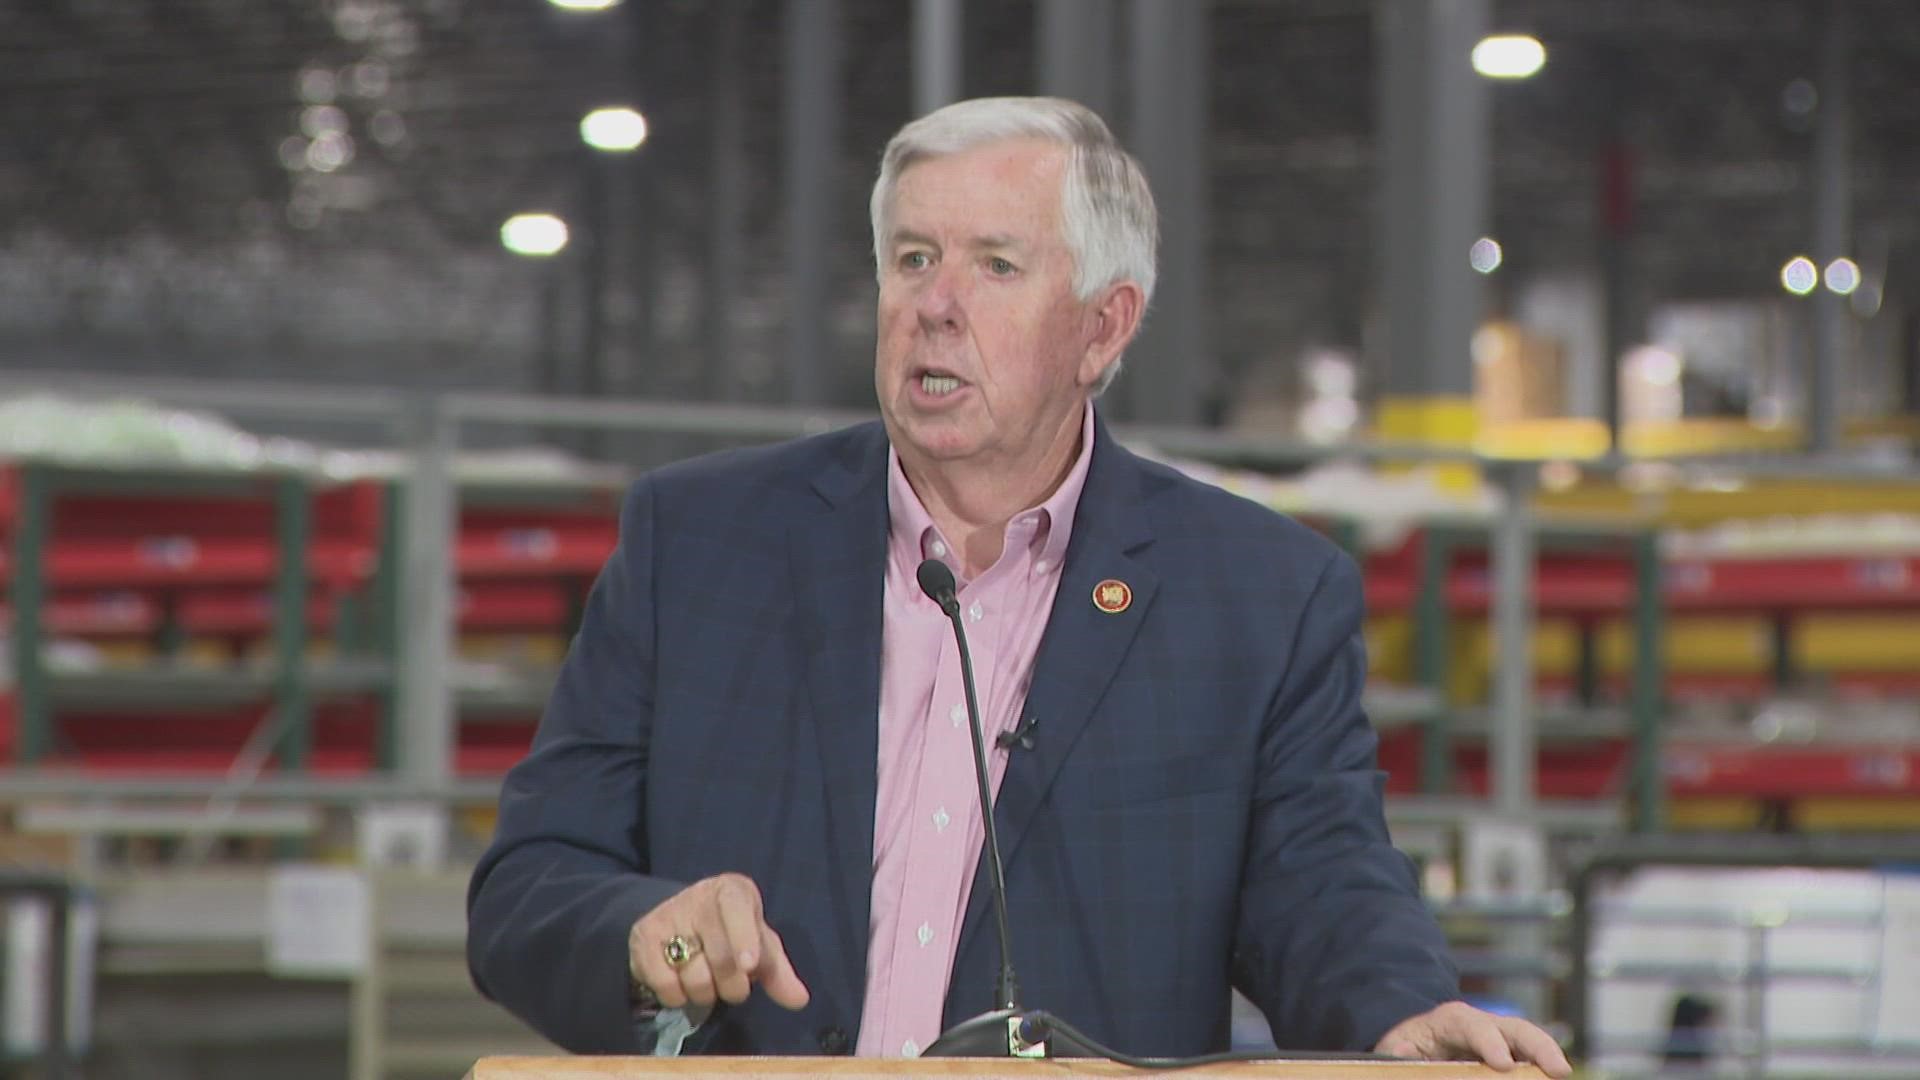 Missouri Governor Mike Parson's plan would cut state income taxes from 5.4% to 4.8% if passed.